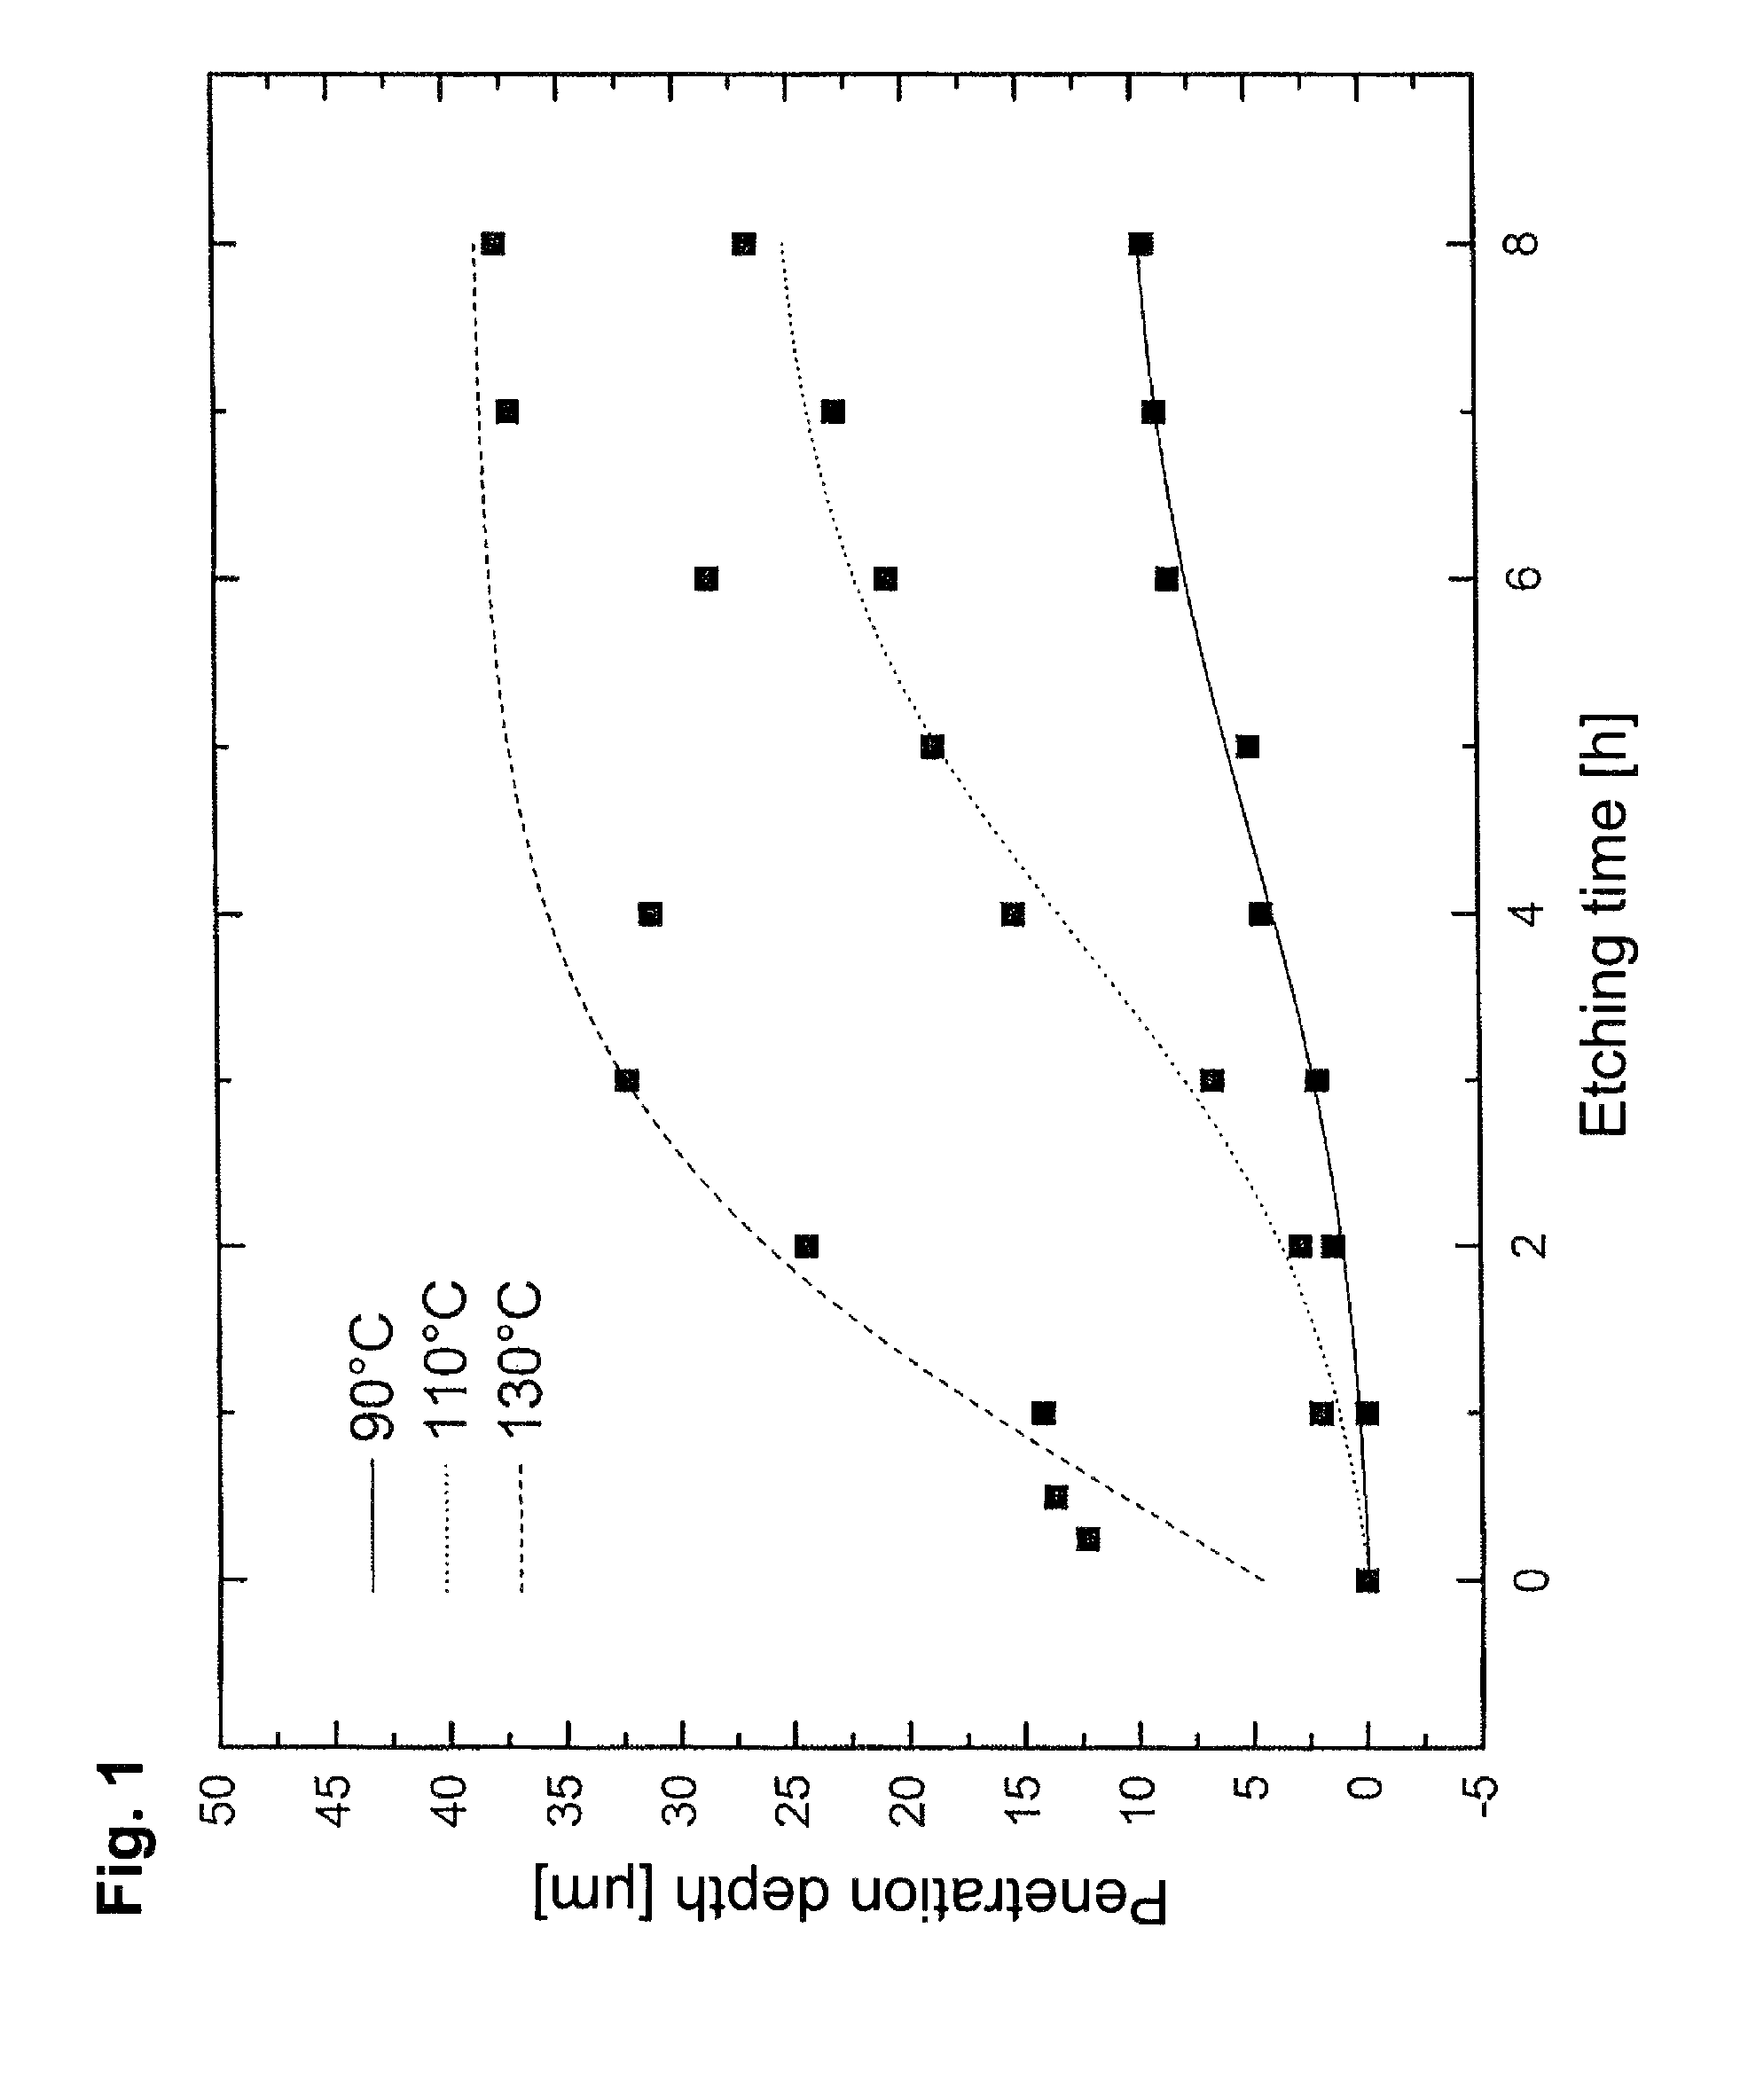 Ceramic substrate material, method for the production and use thereof, and antenna or antenna array